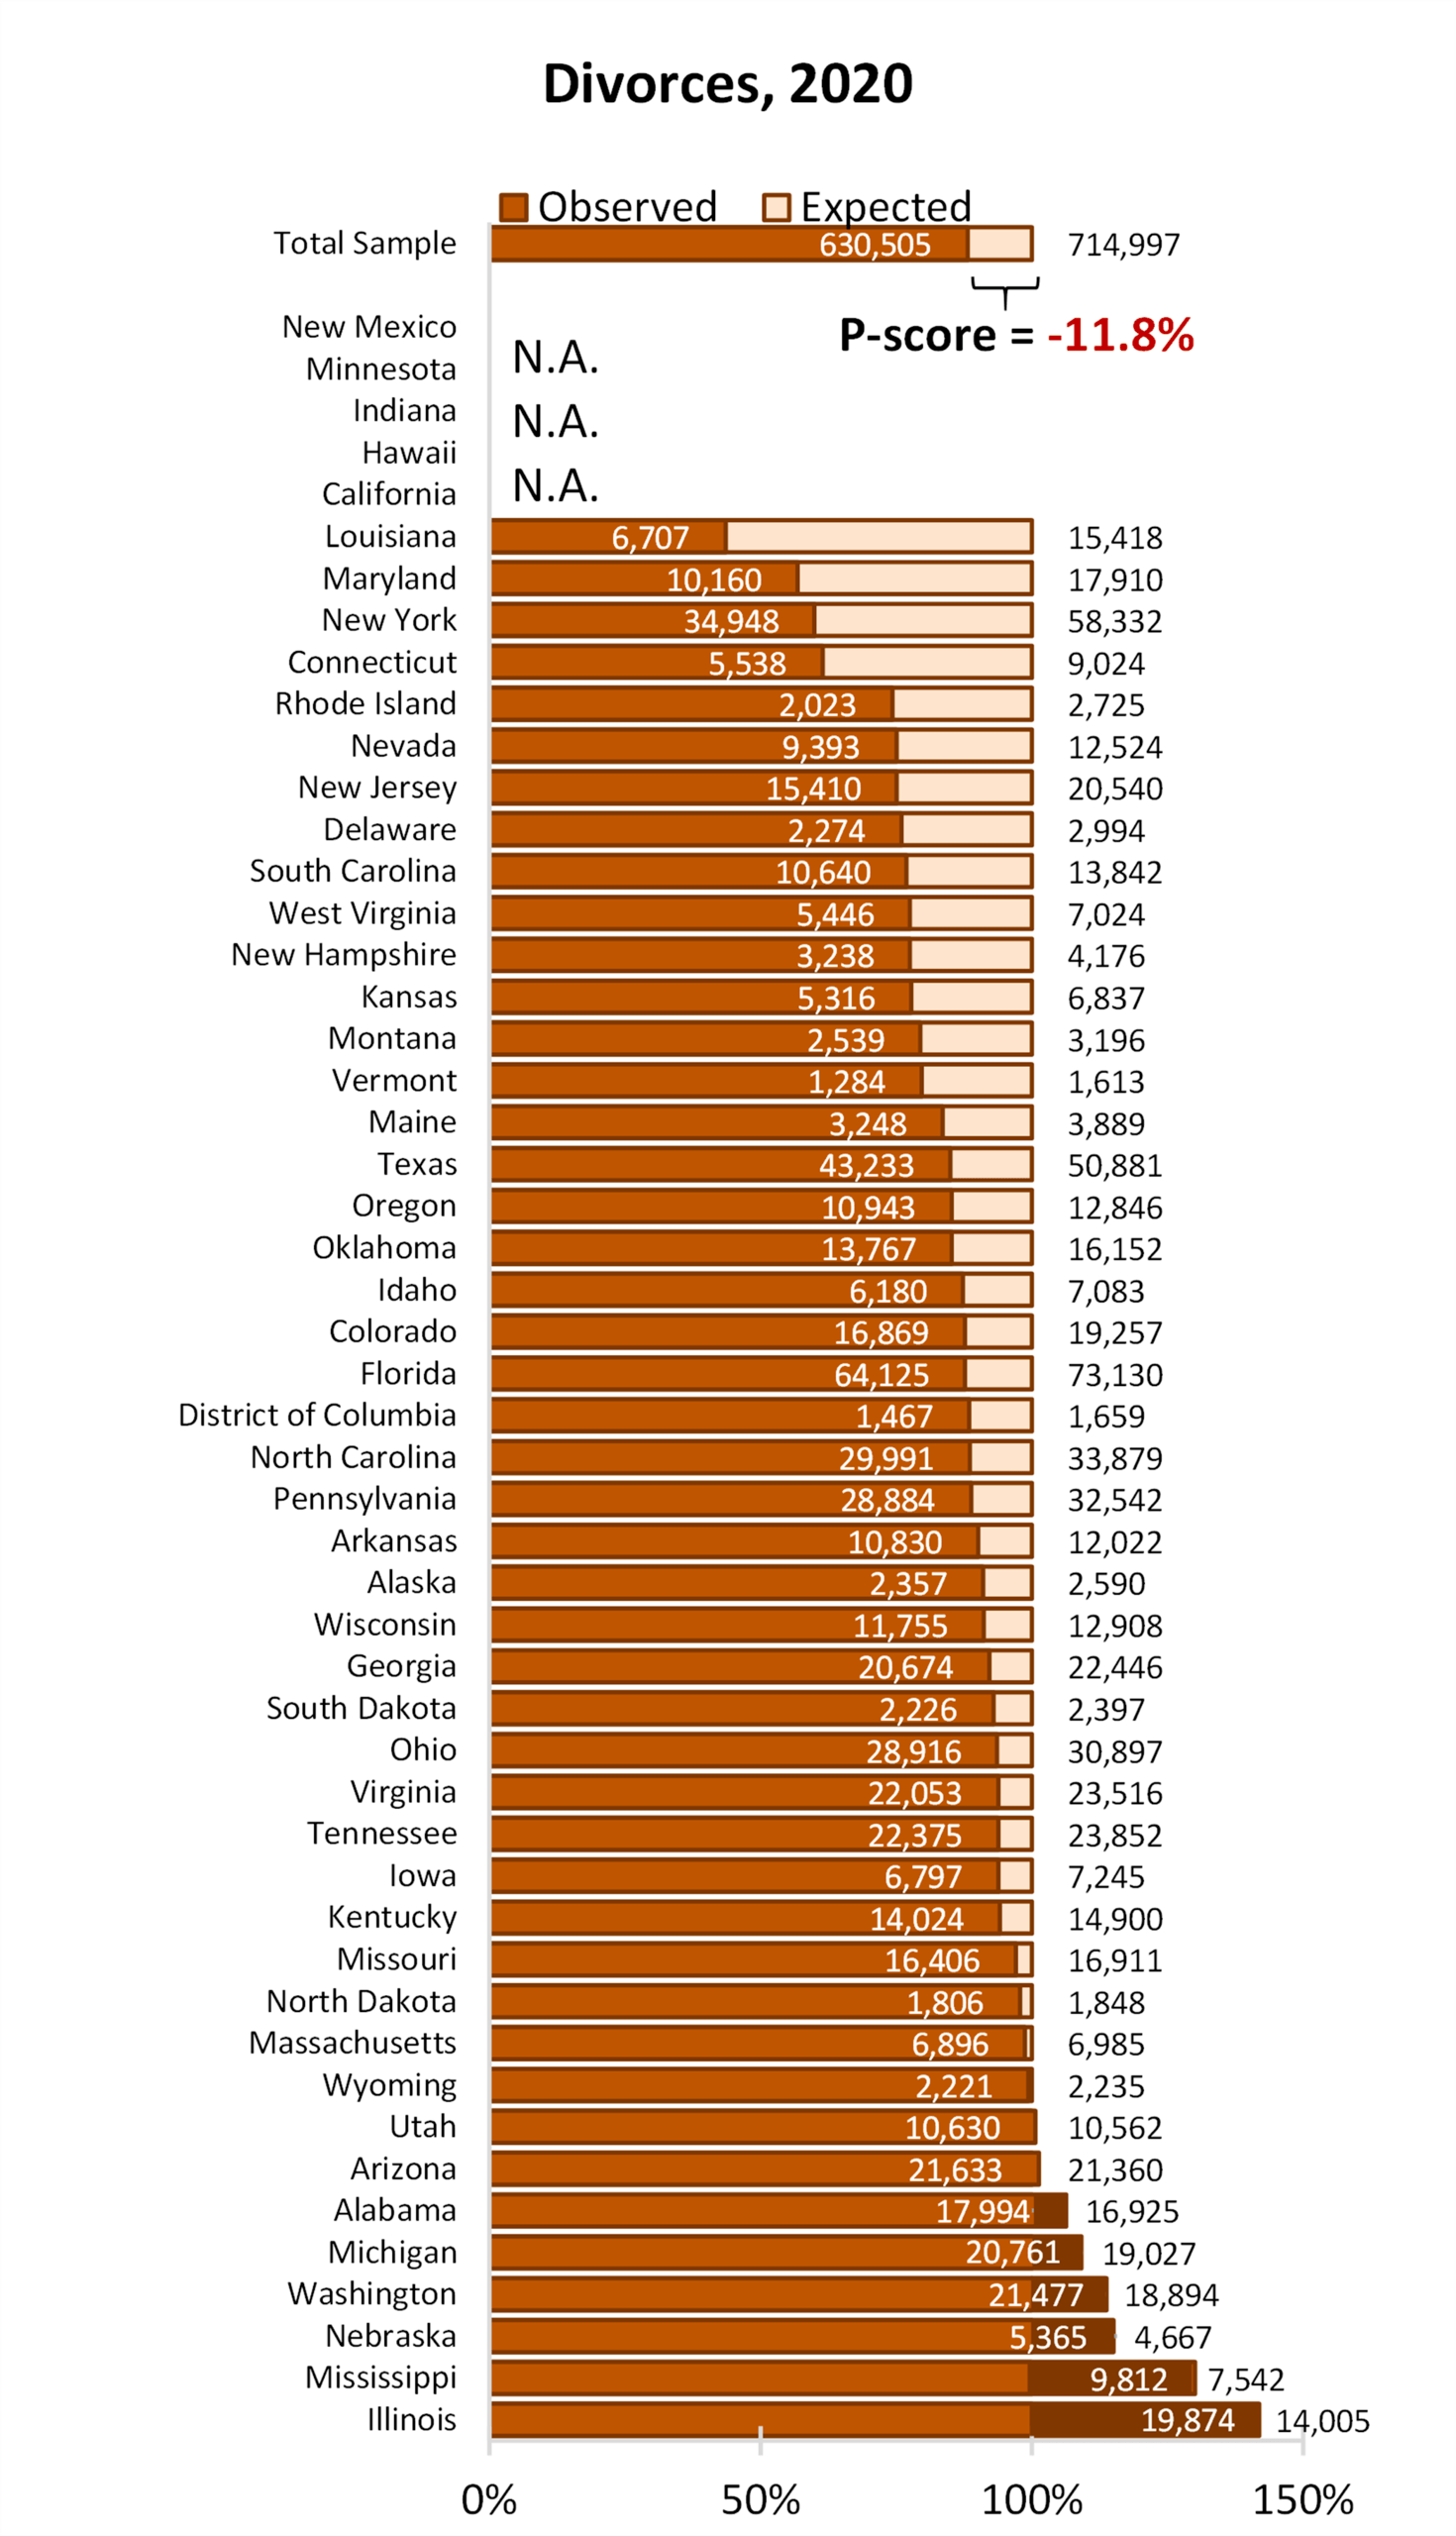 Graph showing Observed and Expected Numbers of Divorces by State and for the Nation, 2020